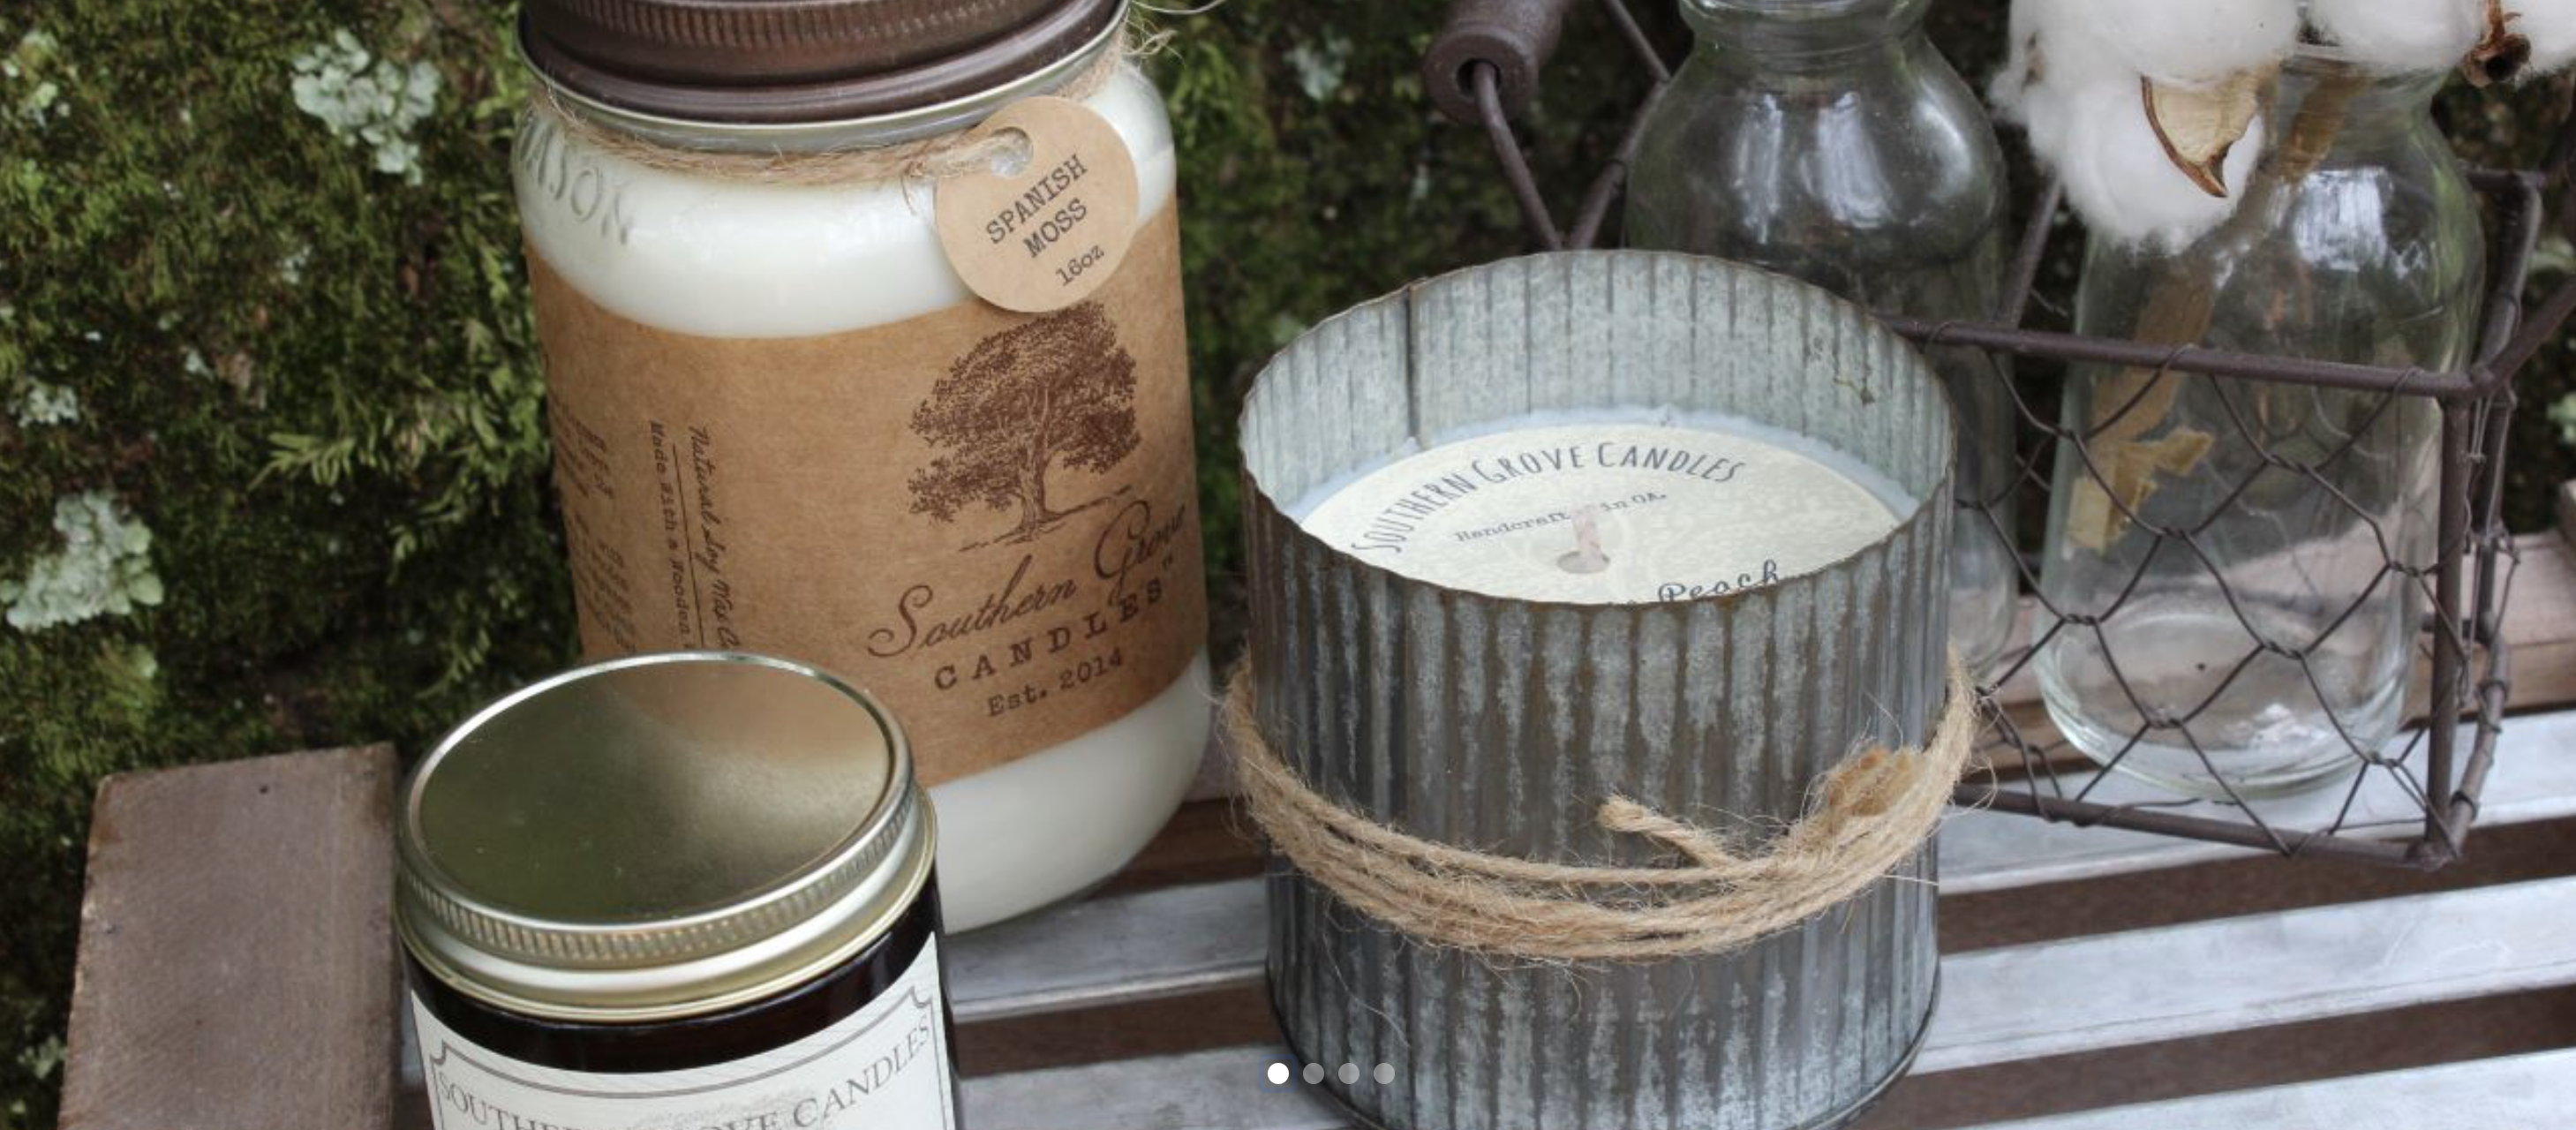 southern grove candles made in georgia